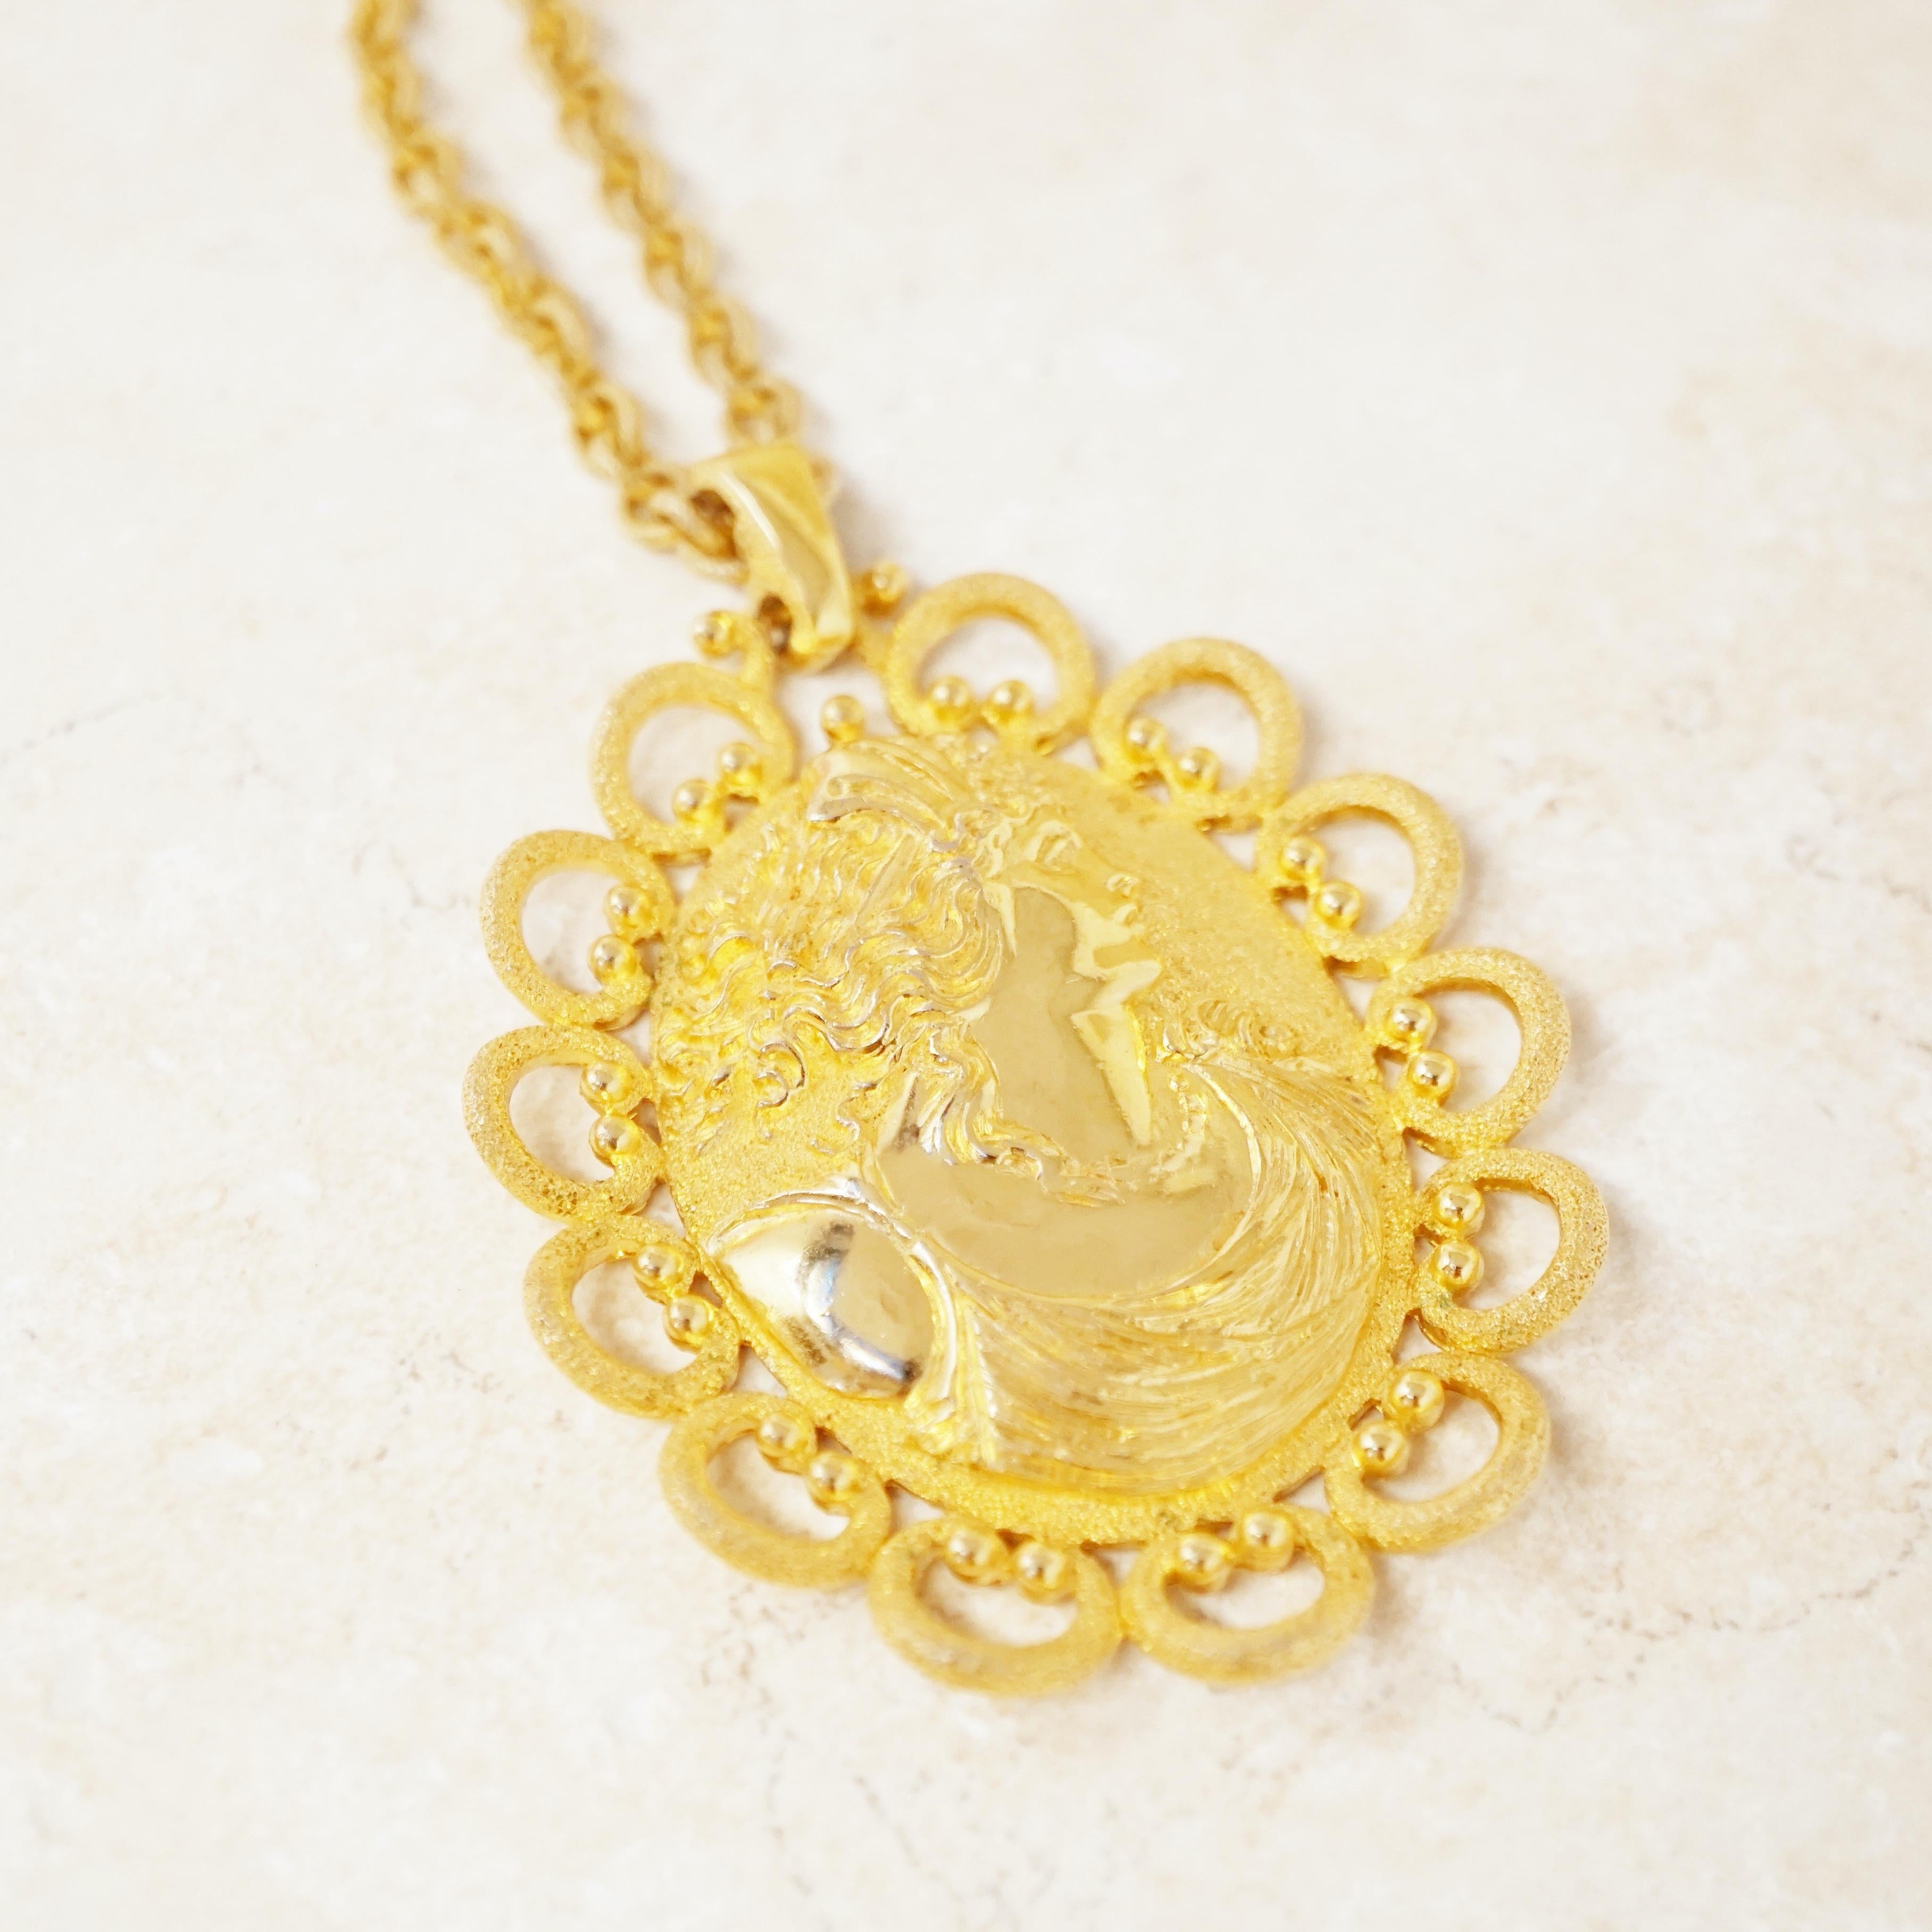 Women's Vintage Gilded Roman Goddess Cameo Pendant Necklace by Trifari, 1960s For Sale